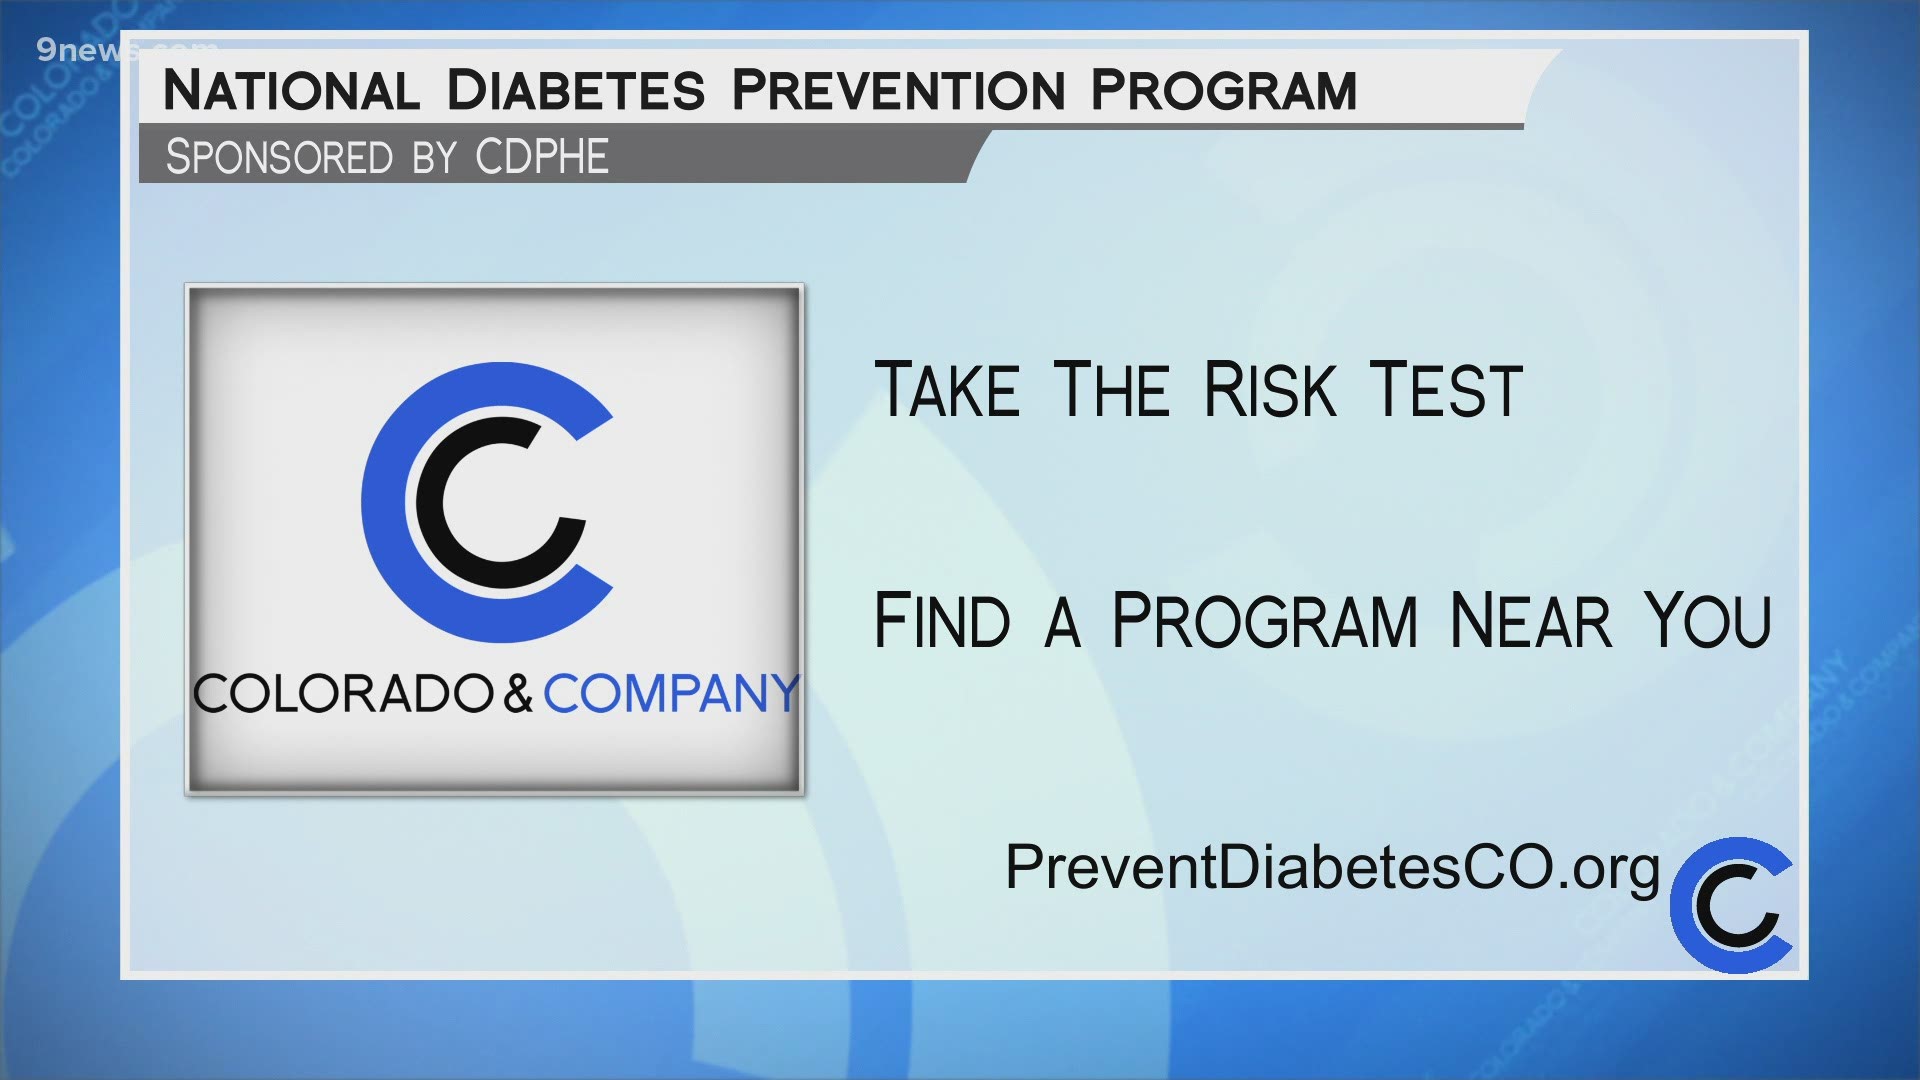 The National Diabetes Prevention Program is proven to reduce risk of type 2 diabetes by 58%. Learn more and take the risk test at PreventDiabetesCO.org.